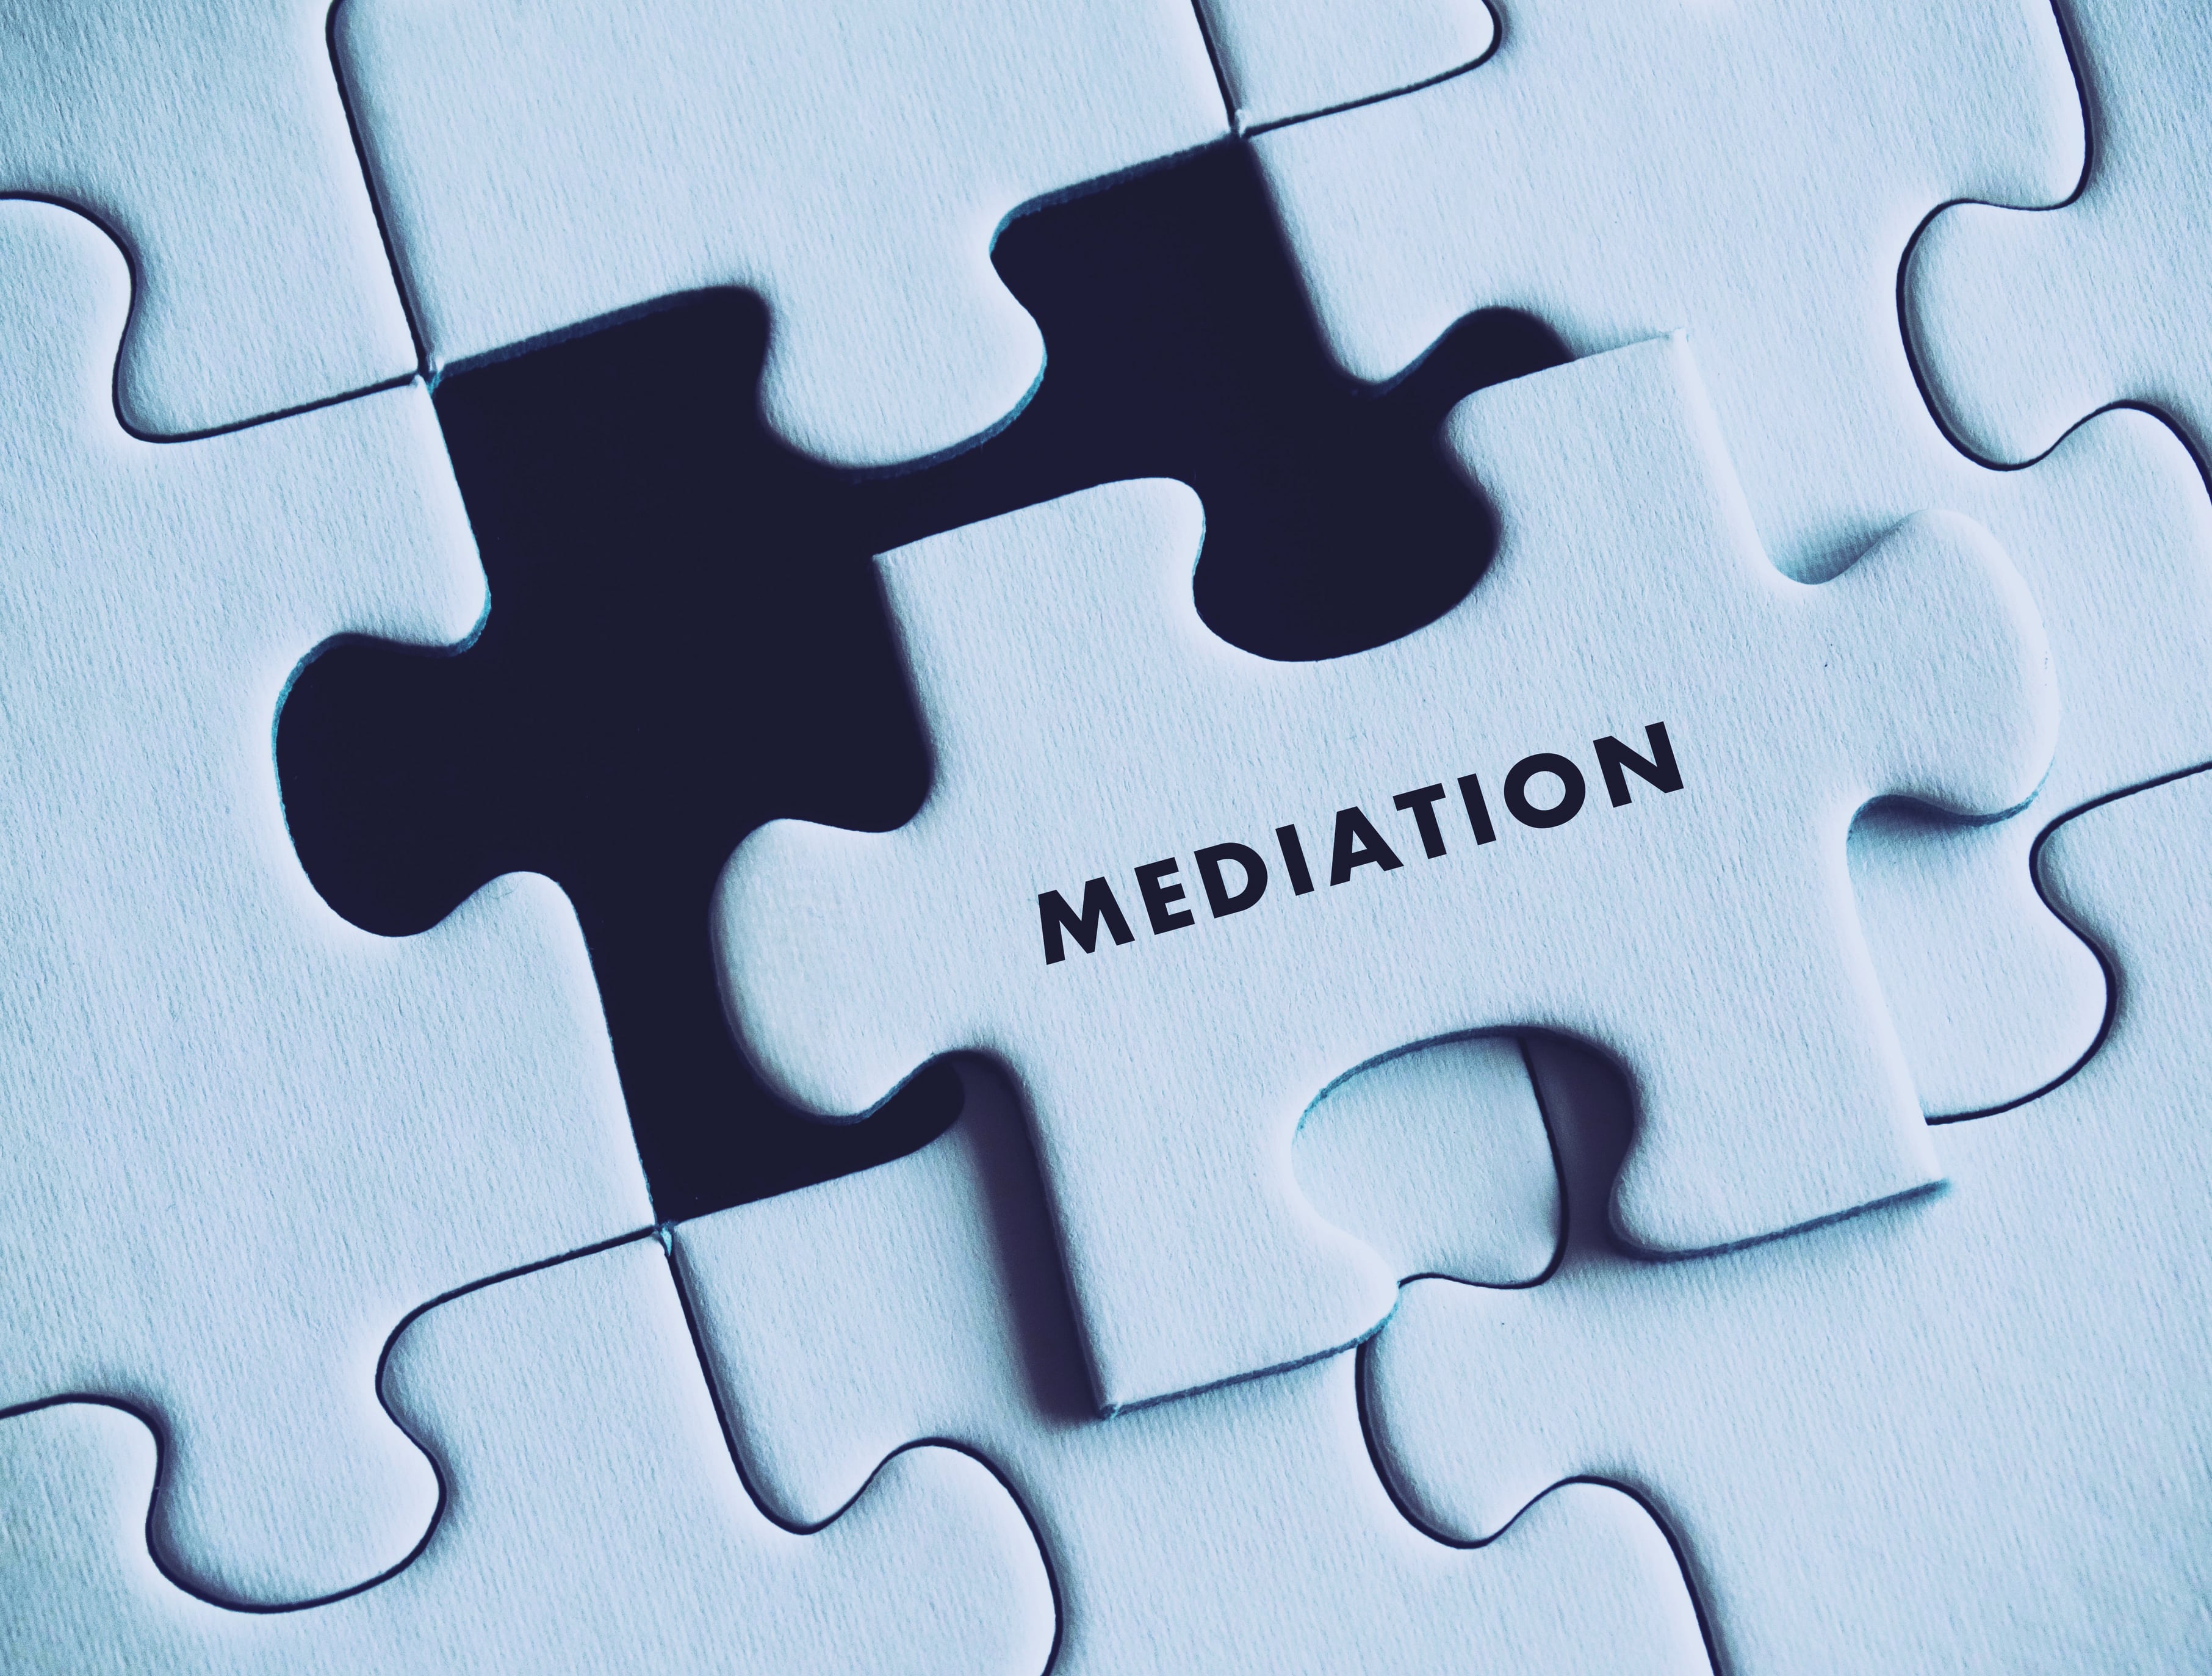 Mediation in property settlement disputes – Why it is important and how to make it work